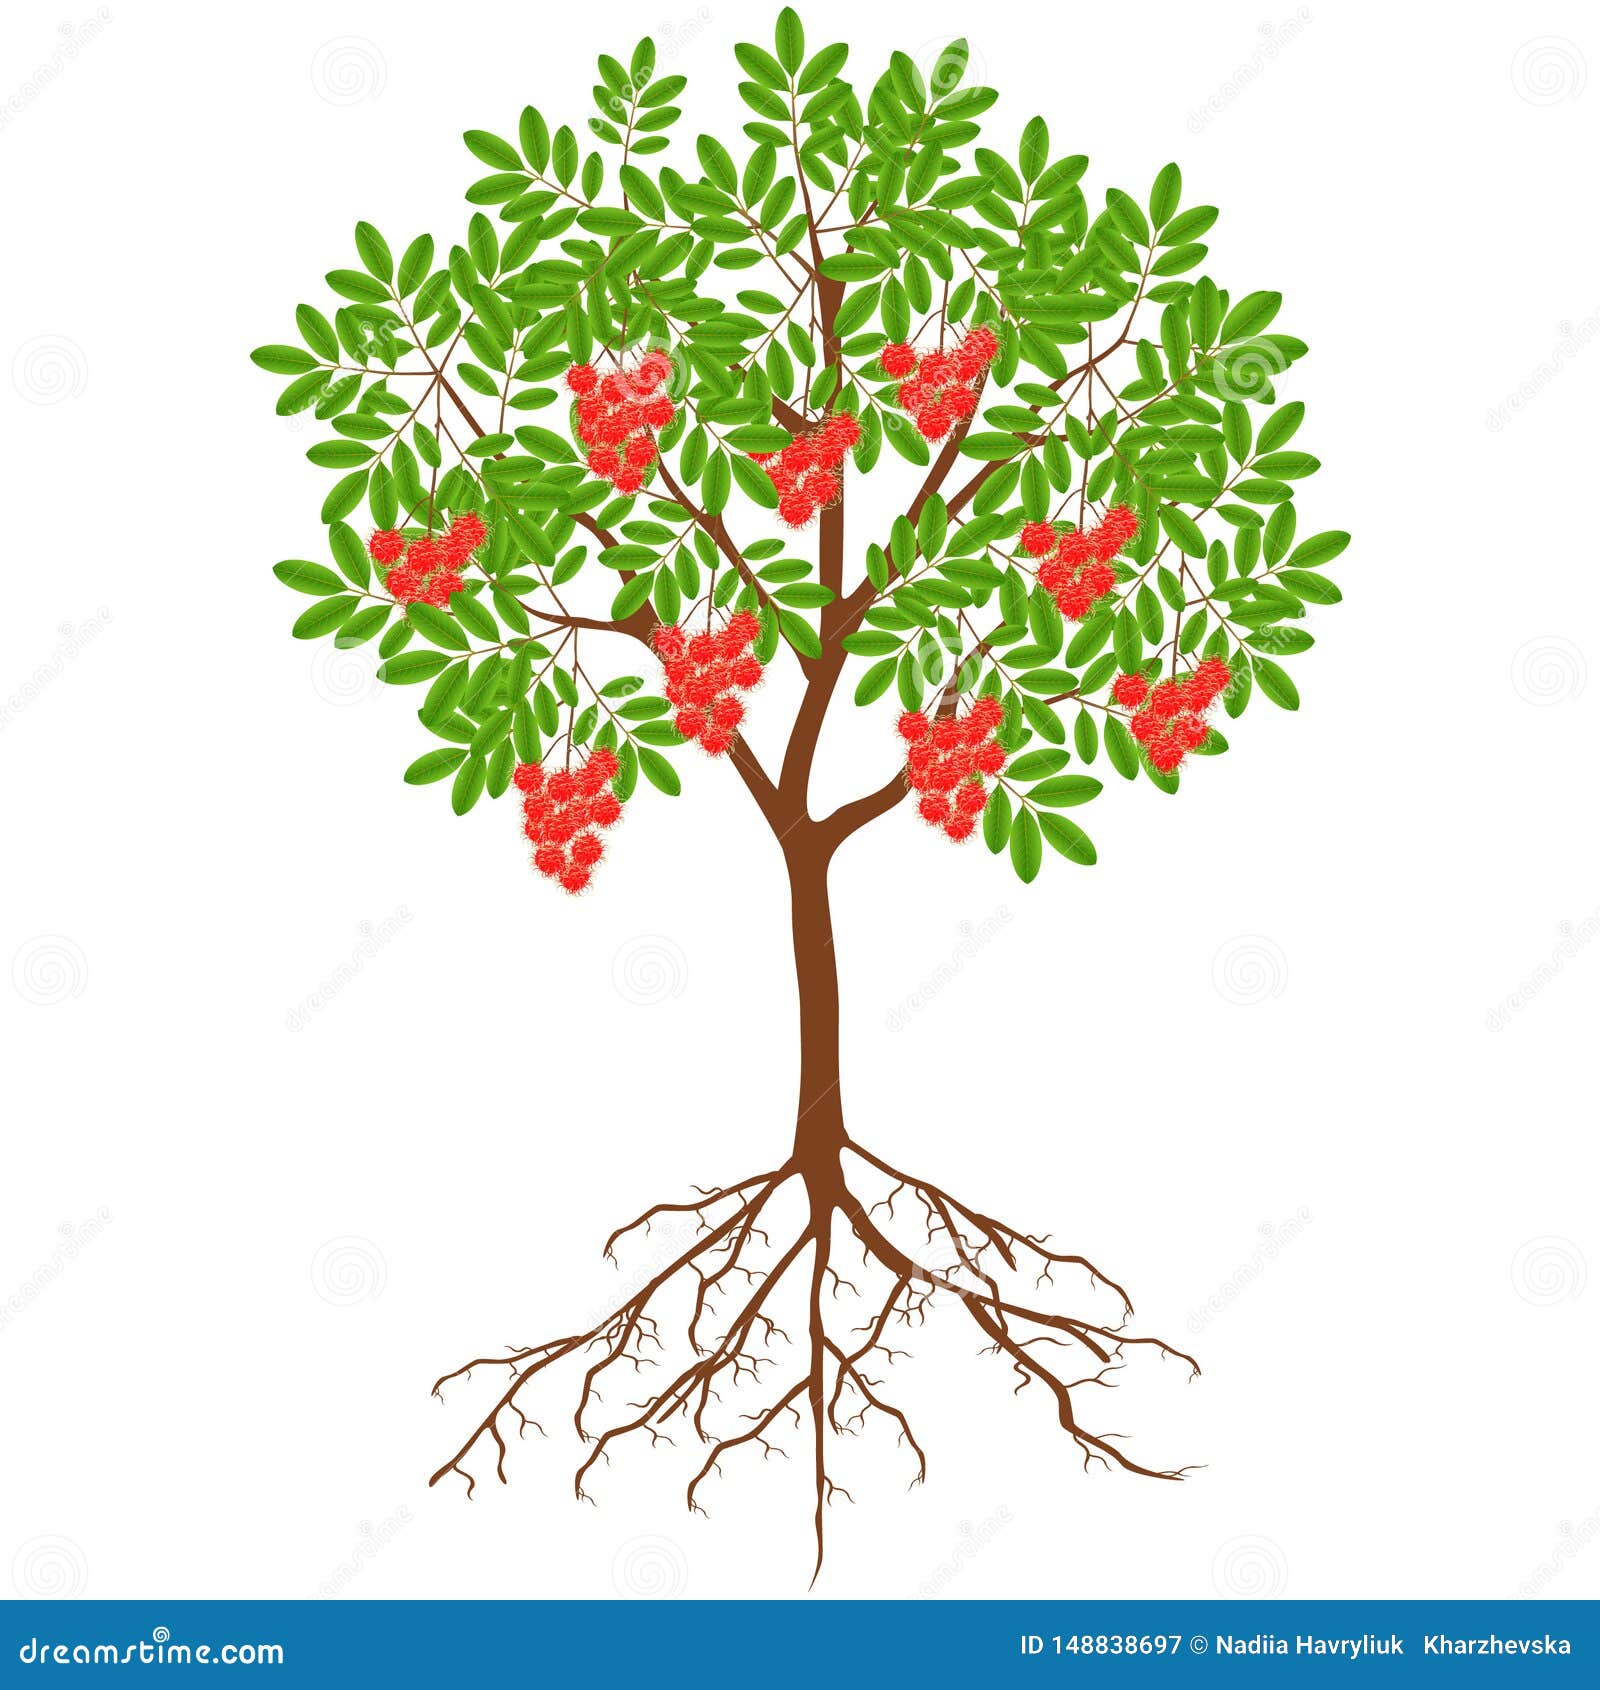 Rambutan Tree With Fruit And Roots On A White Background. Stock Vector